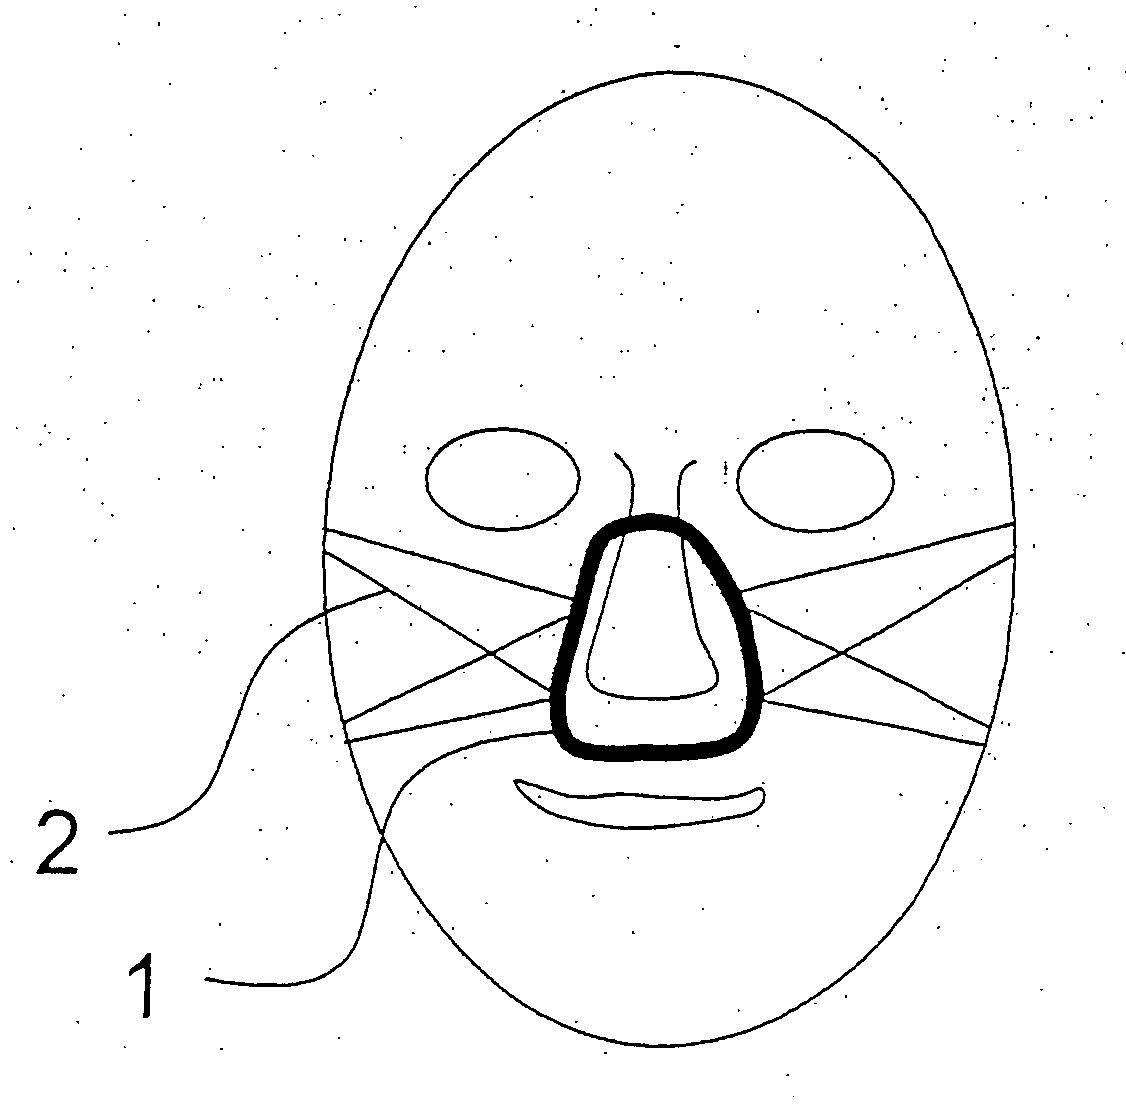 Breathing mask with an adhesive seal